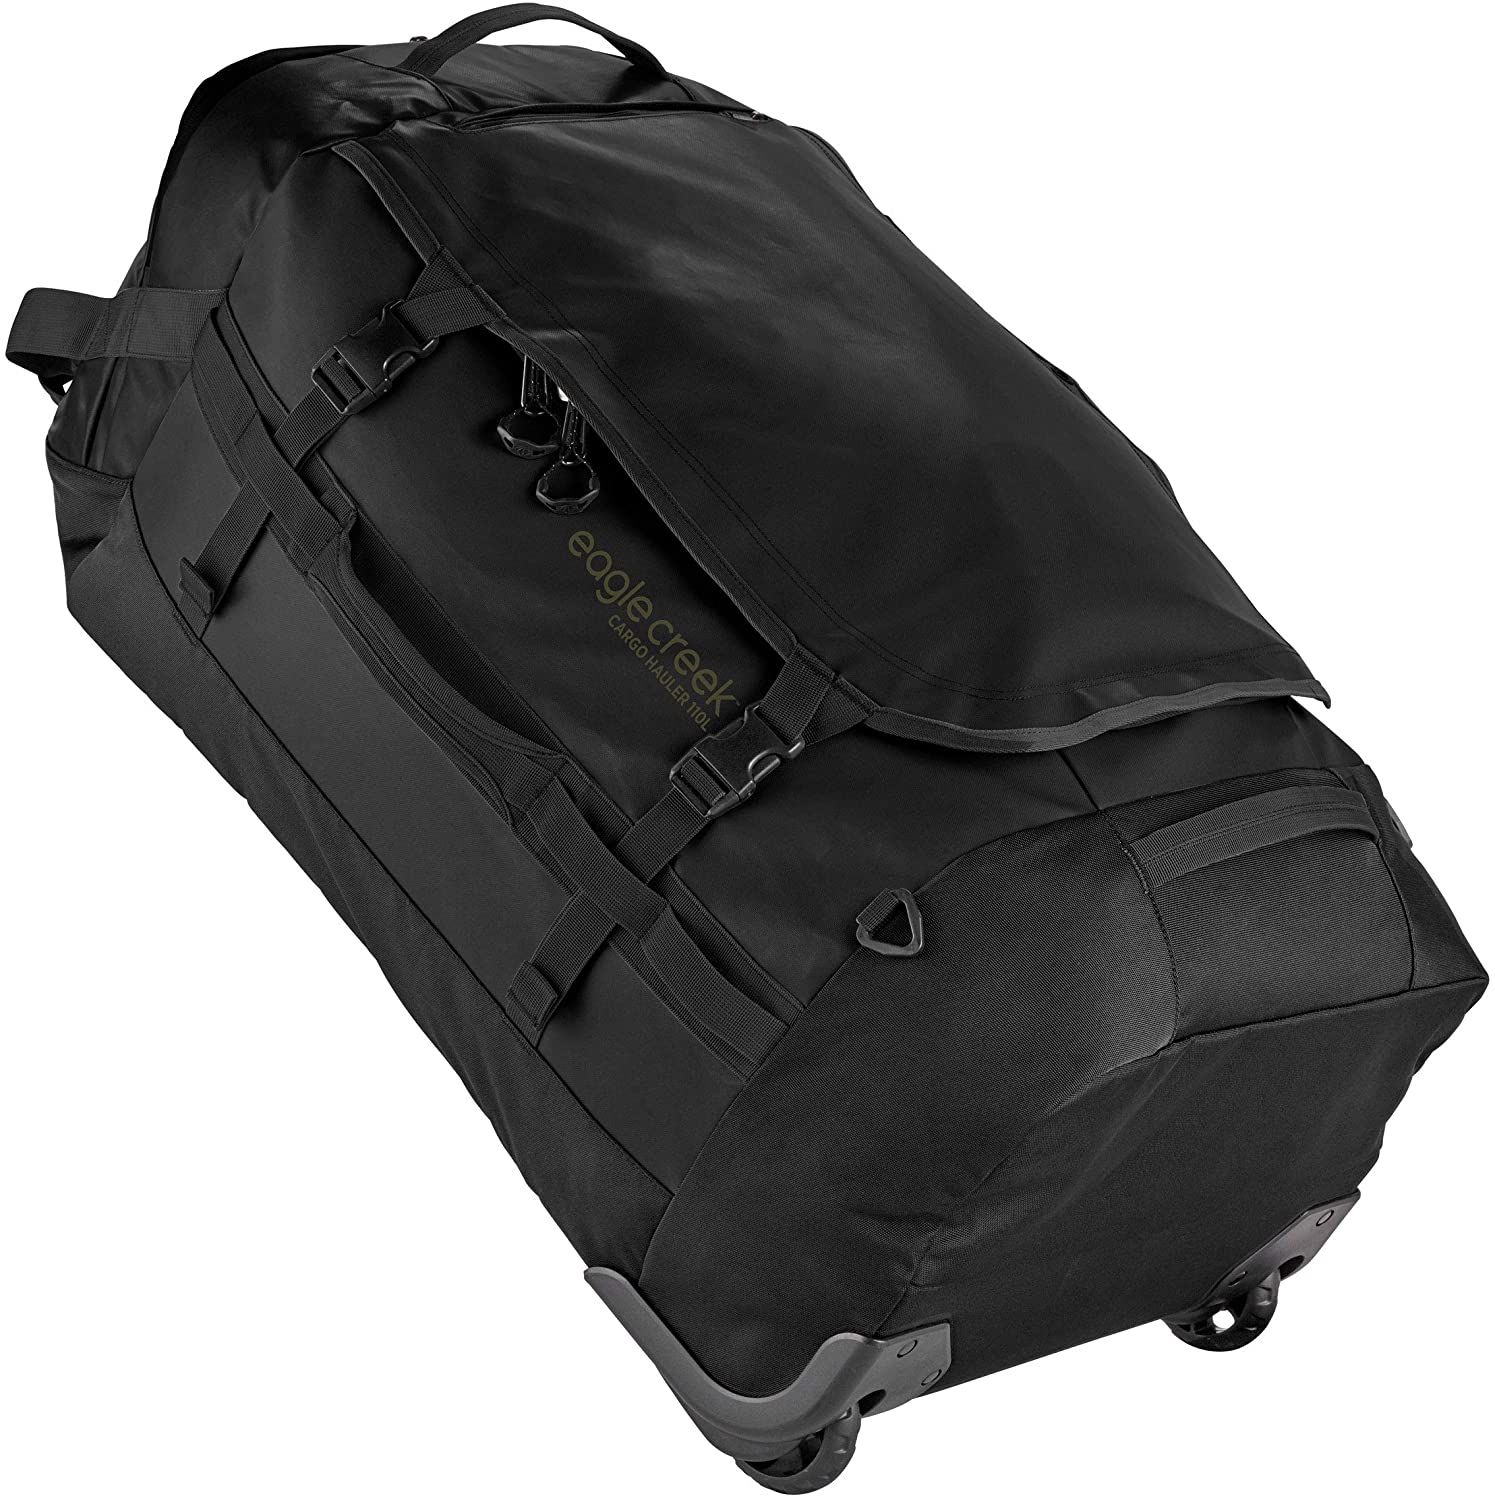 Eagle Creek Cargo Hauler Wheeled Duffel 110L in Jet Black color from the front